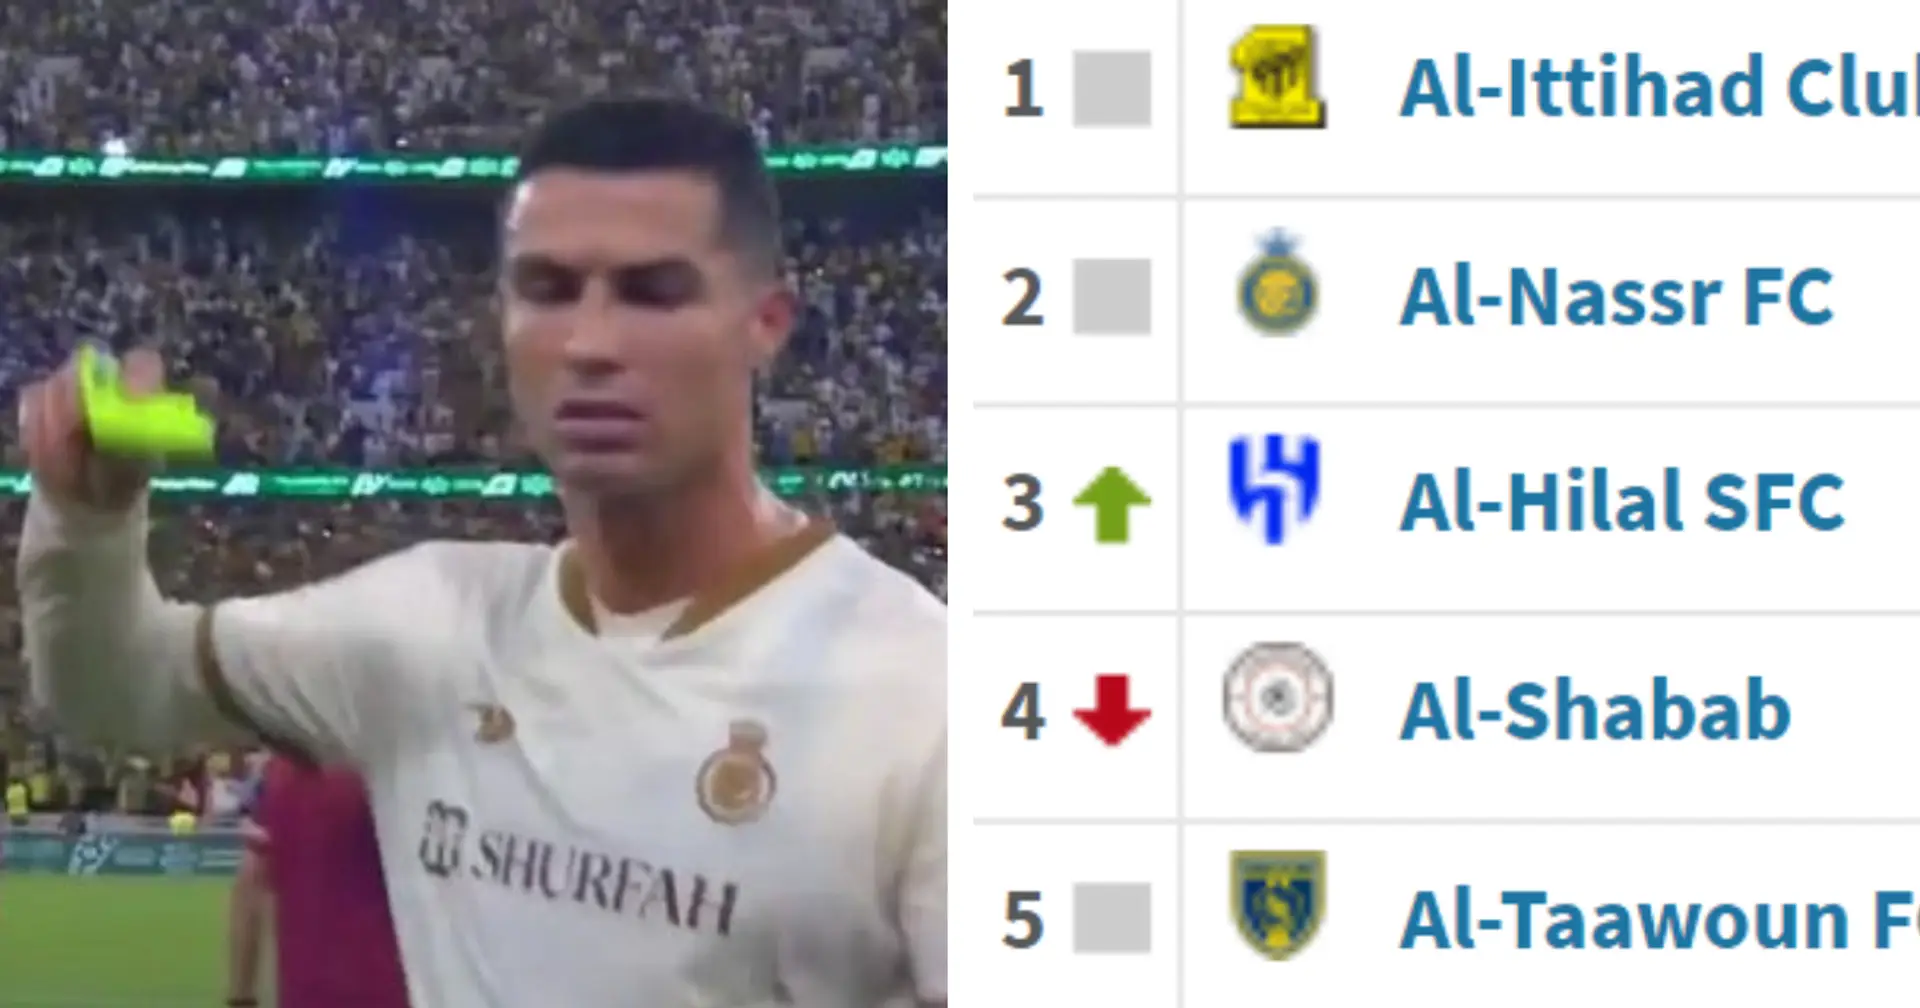 Cristiano Ronaldo's team finishes 2nd in Saudi Arabia league — they were top of the league when he came